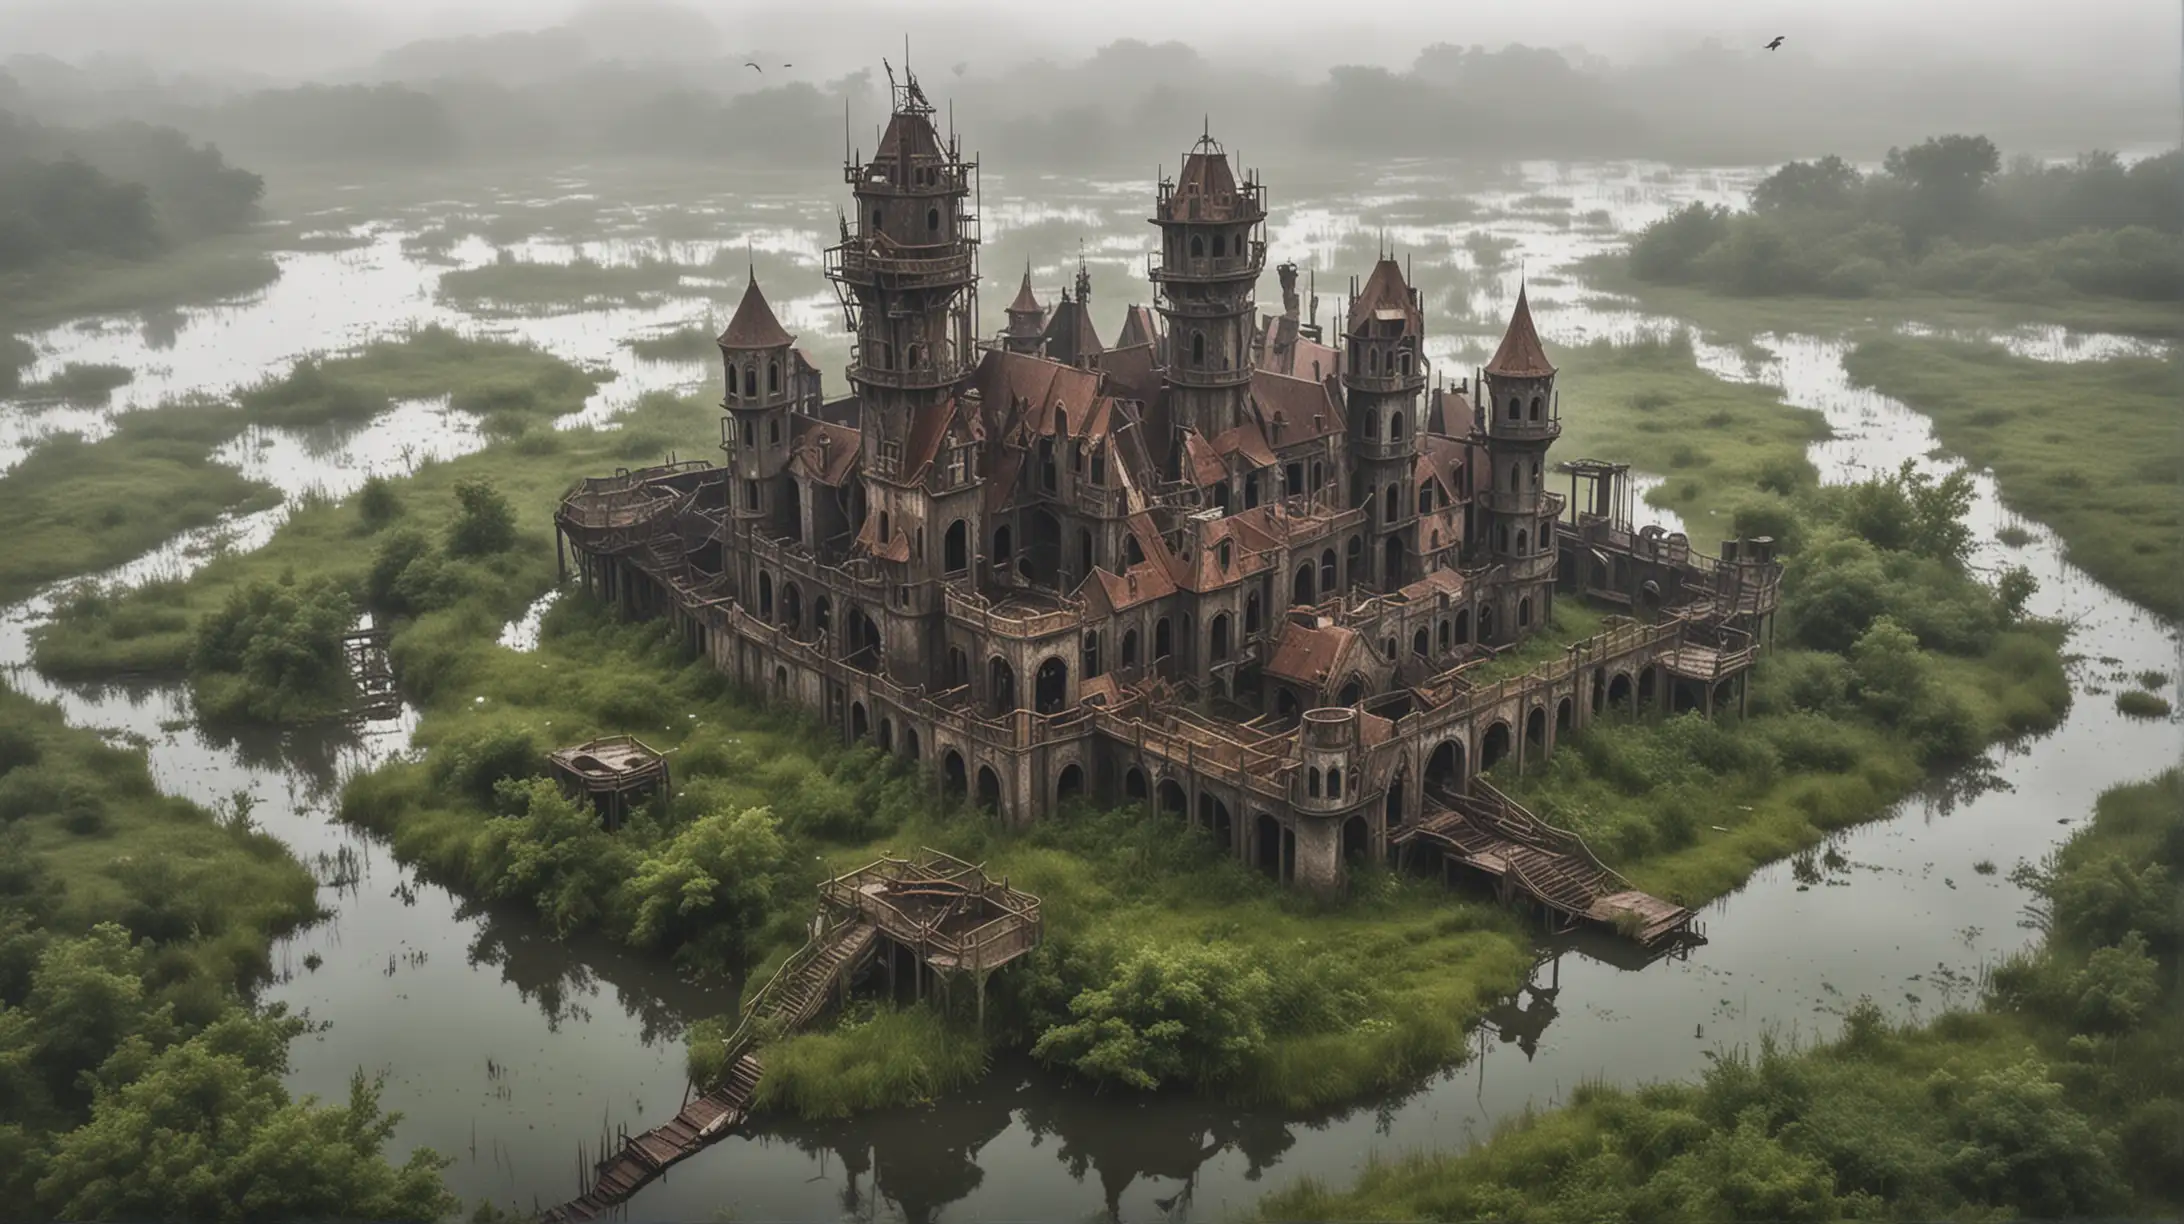 Mysterious Steampunk Castle Ruins in Foggy Wetlands